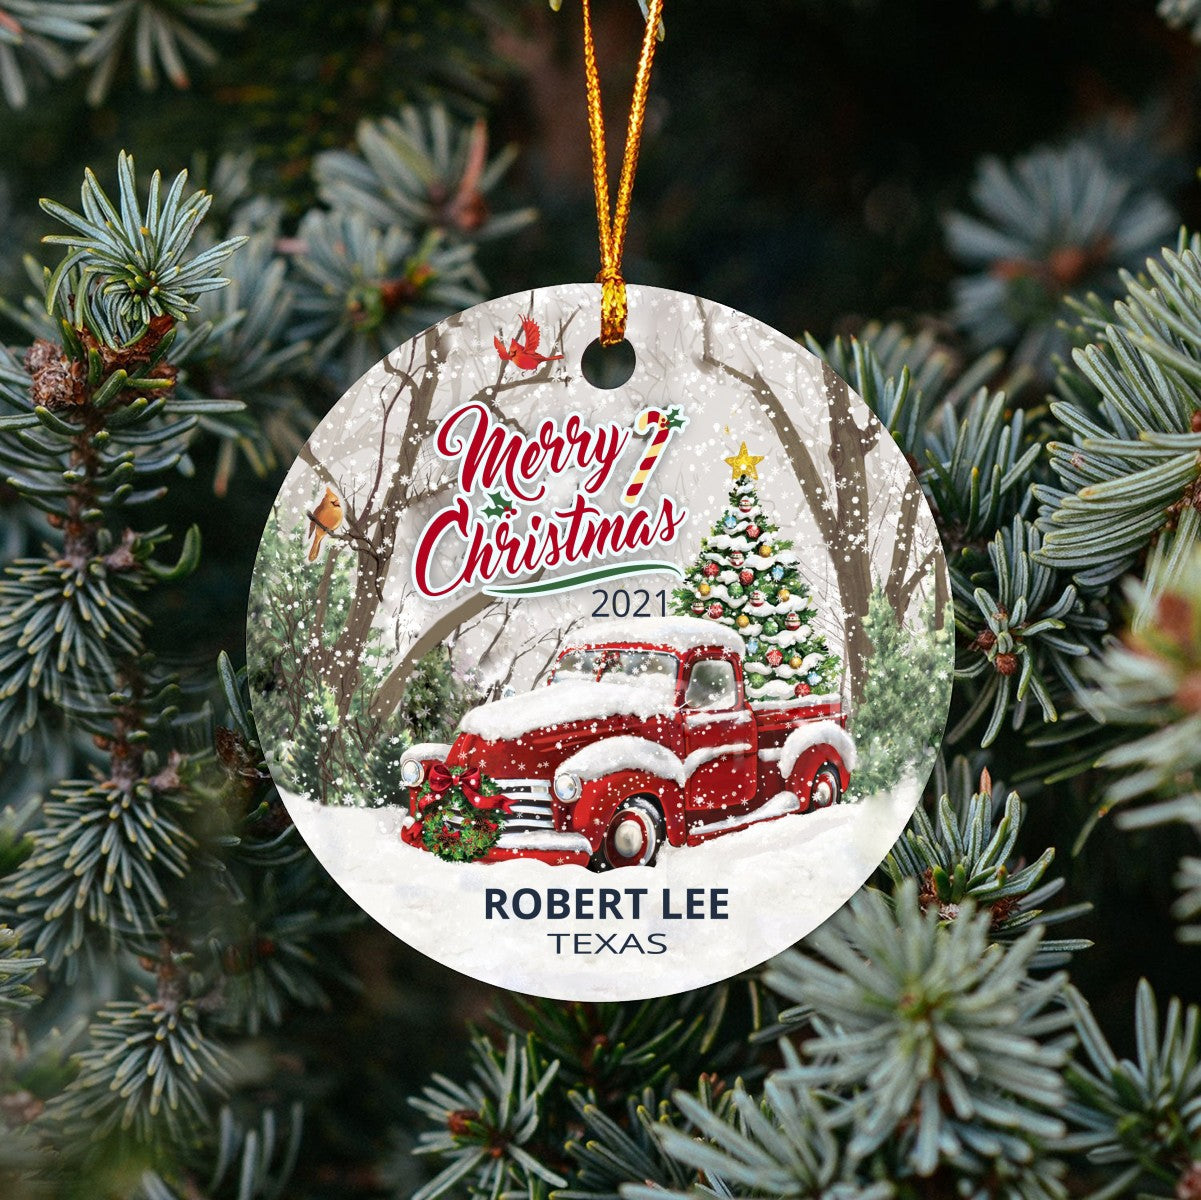 Christmas Tree Ornaments Robert Lee - Ornament With Name City, State Robert Lee Texas TX Ornament - Red Truck Xmas Ornaments 3'' Plastic Gift For Family, Friend And Housewarming